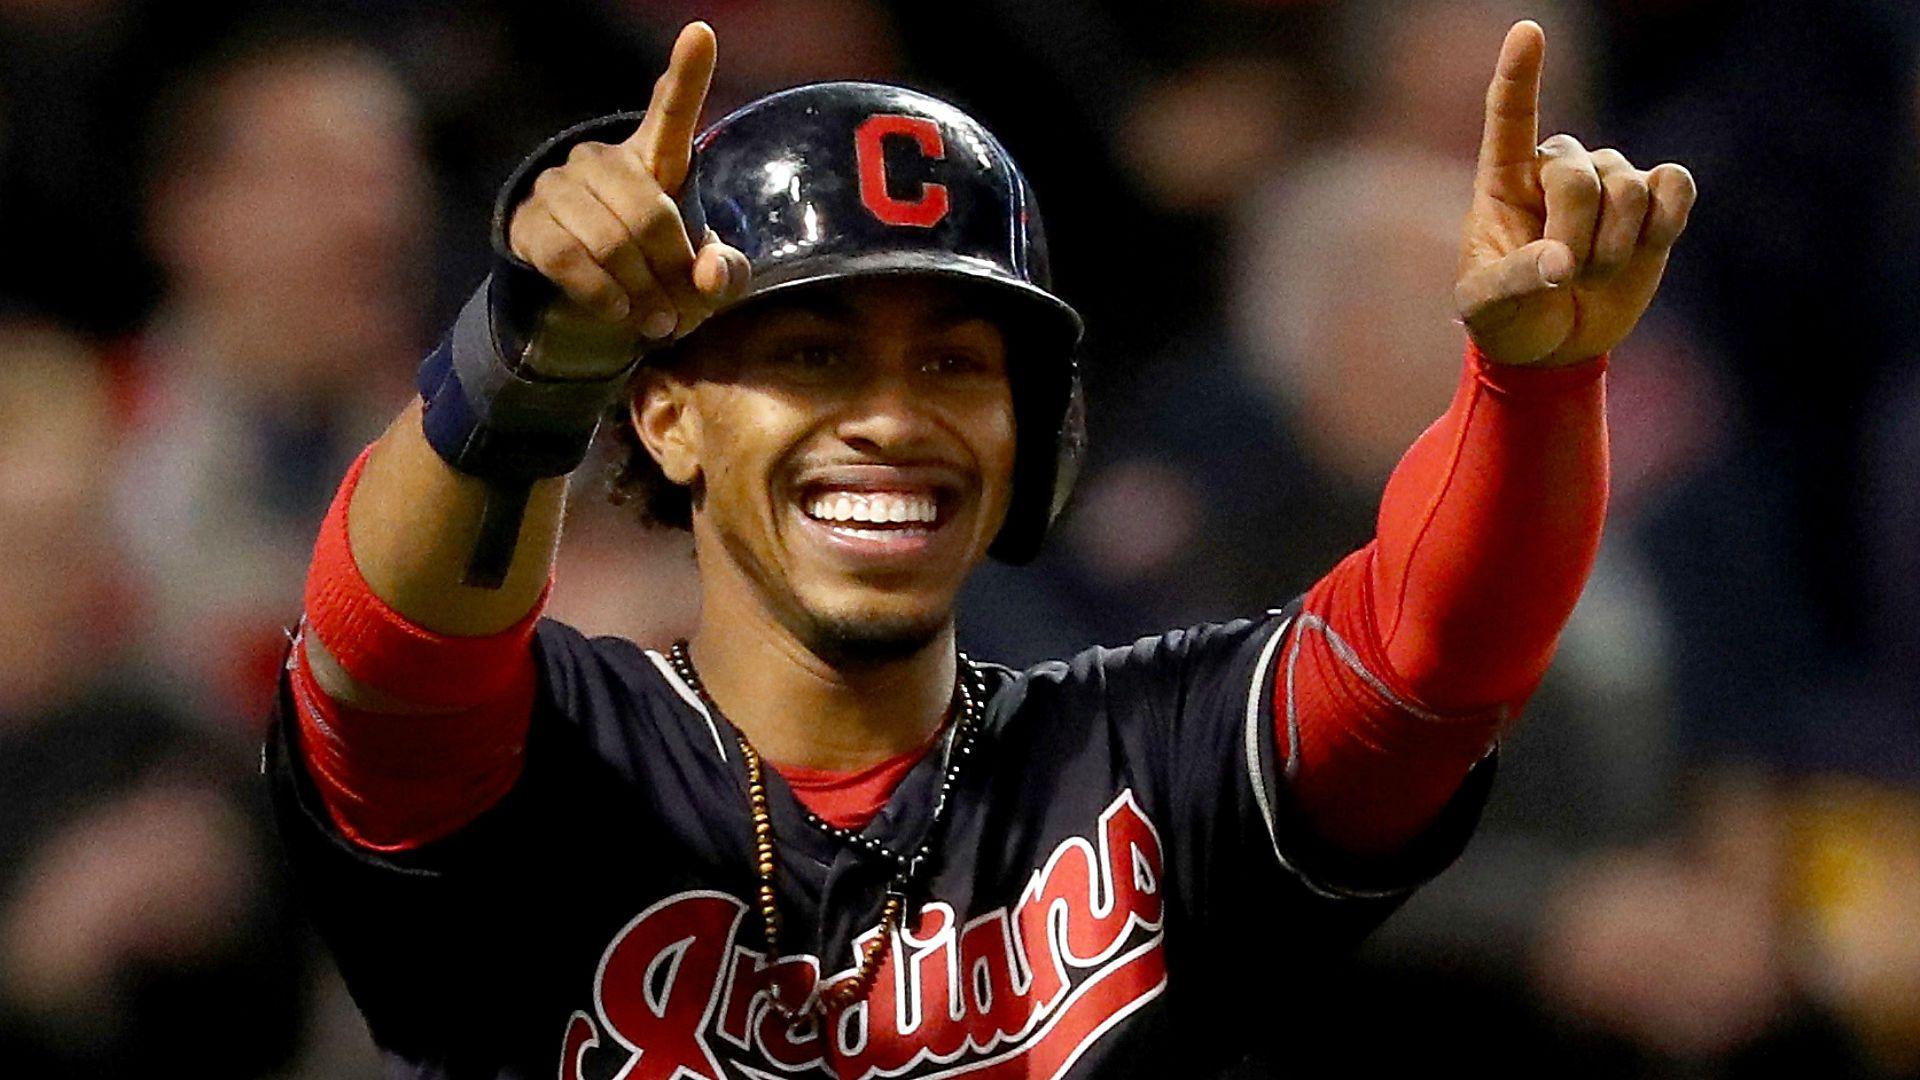 Francisco Lindor wallpaper by Pitin2017 - Download on ZEDGE™